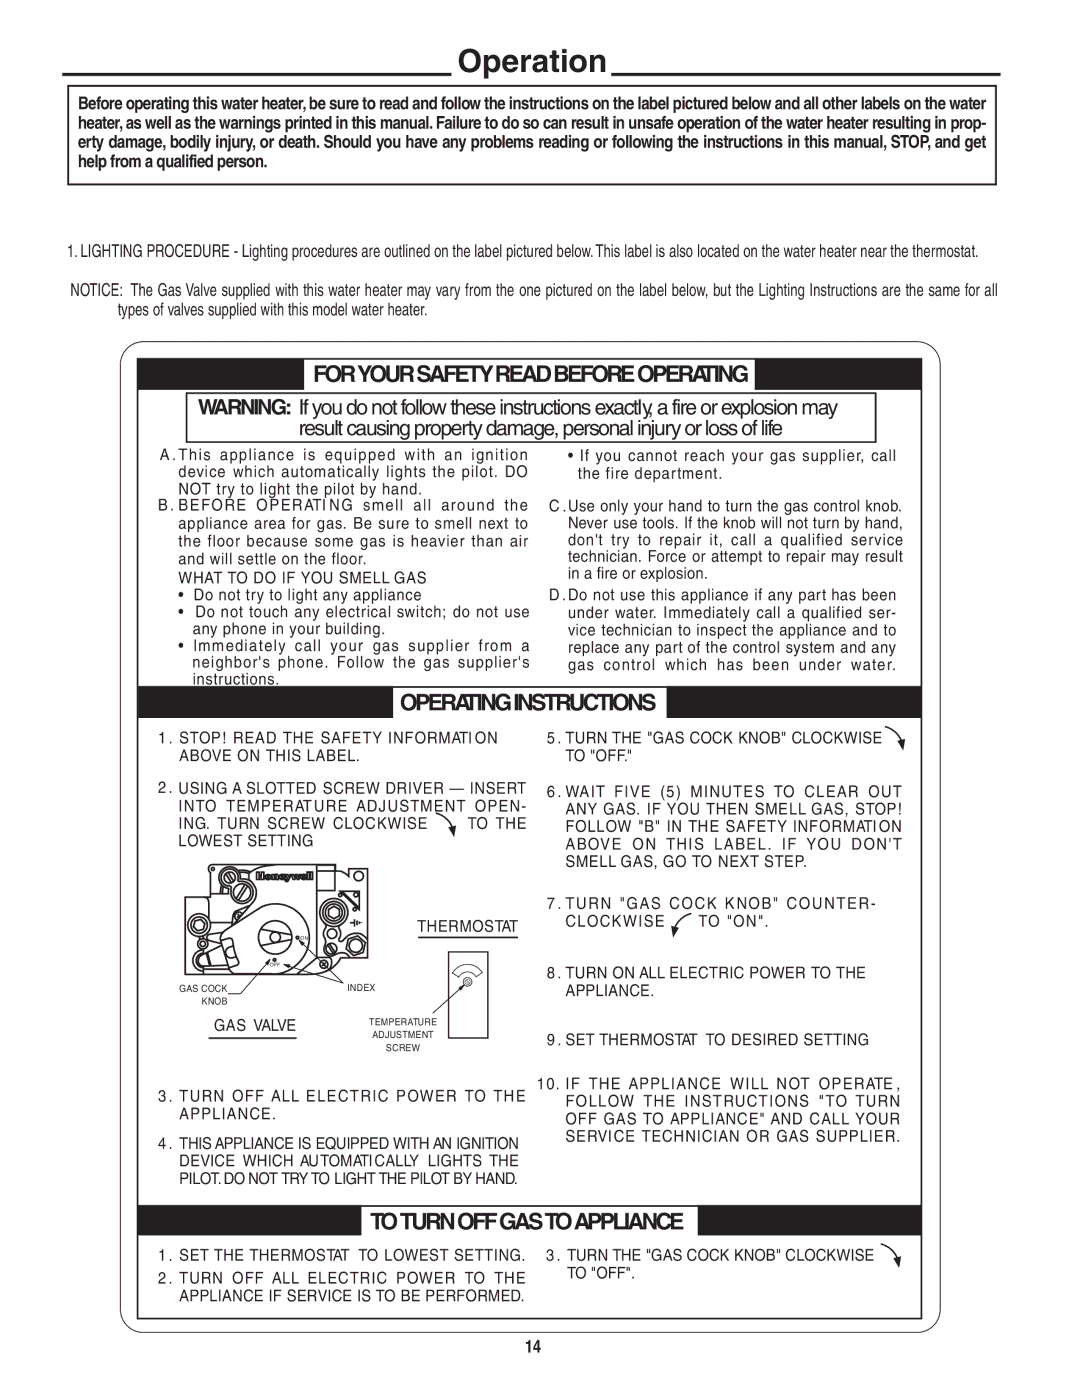 Rheem Commercial Power Direct Vent Water heater installation instructions Operation, Foryoursafetyreadbeforeoperating 